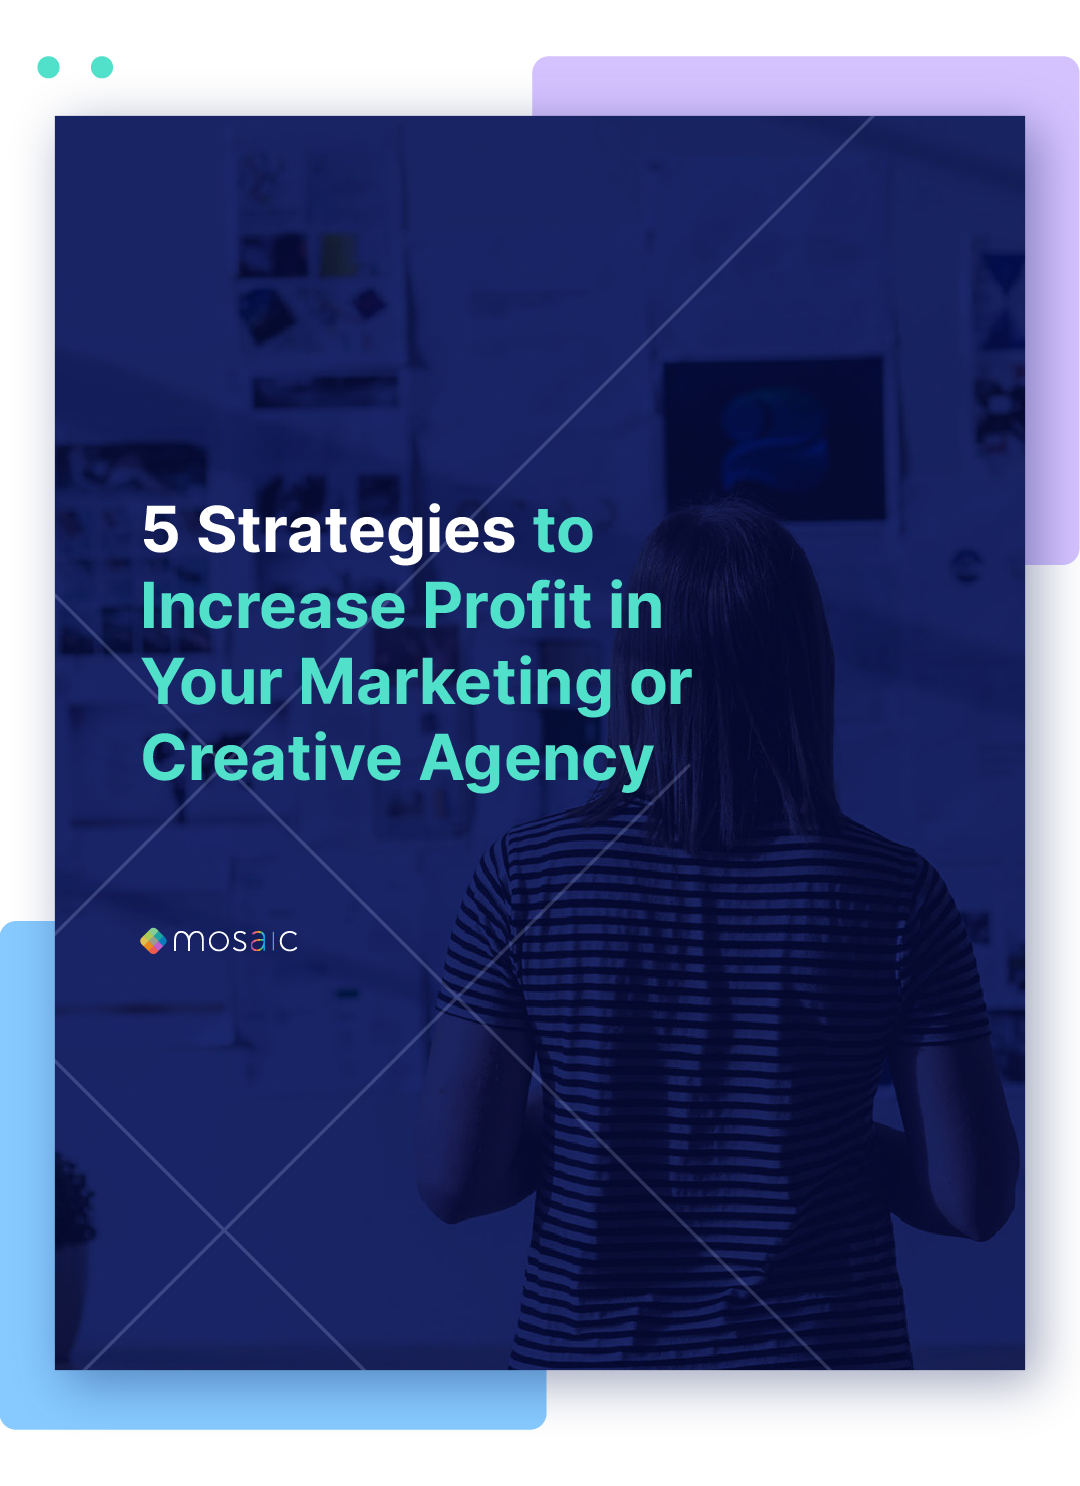 5 Strategies to Increase Profit in Your Marketing or Creative Agency